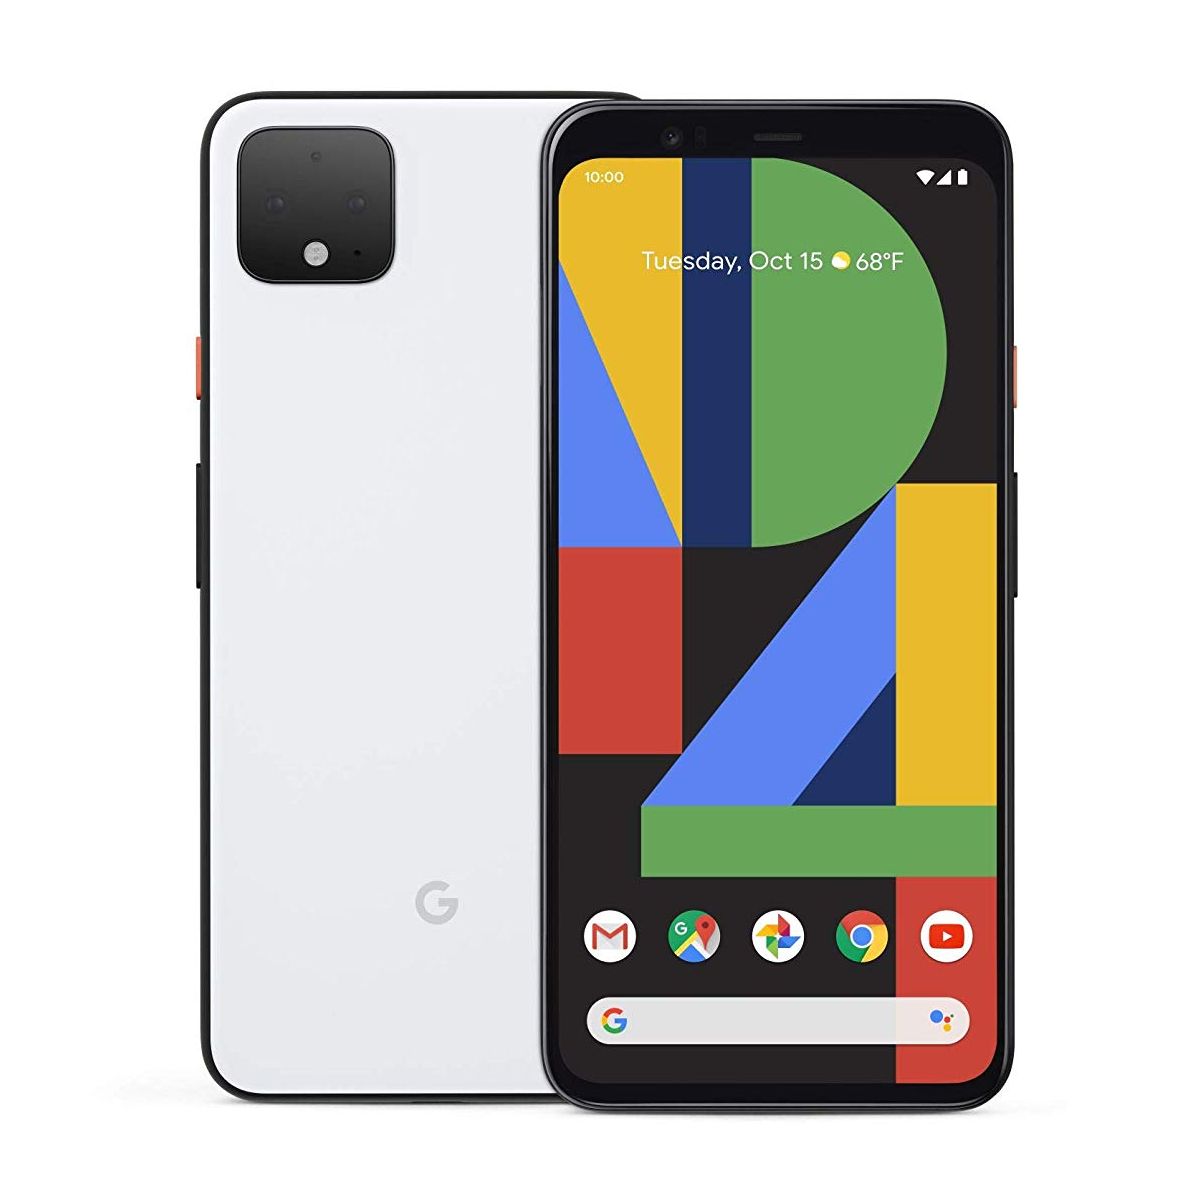 Google Pixel 4 XL Smartphone 128GB Clearly White (US)